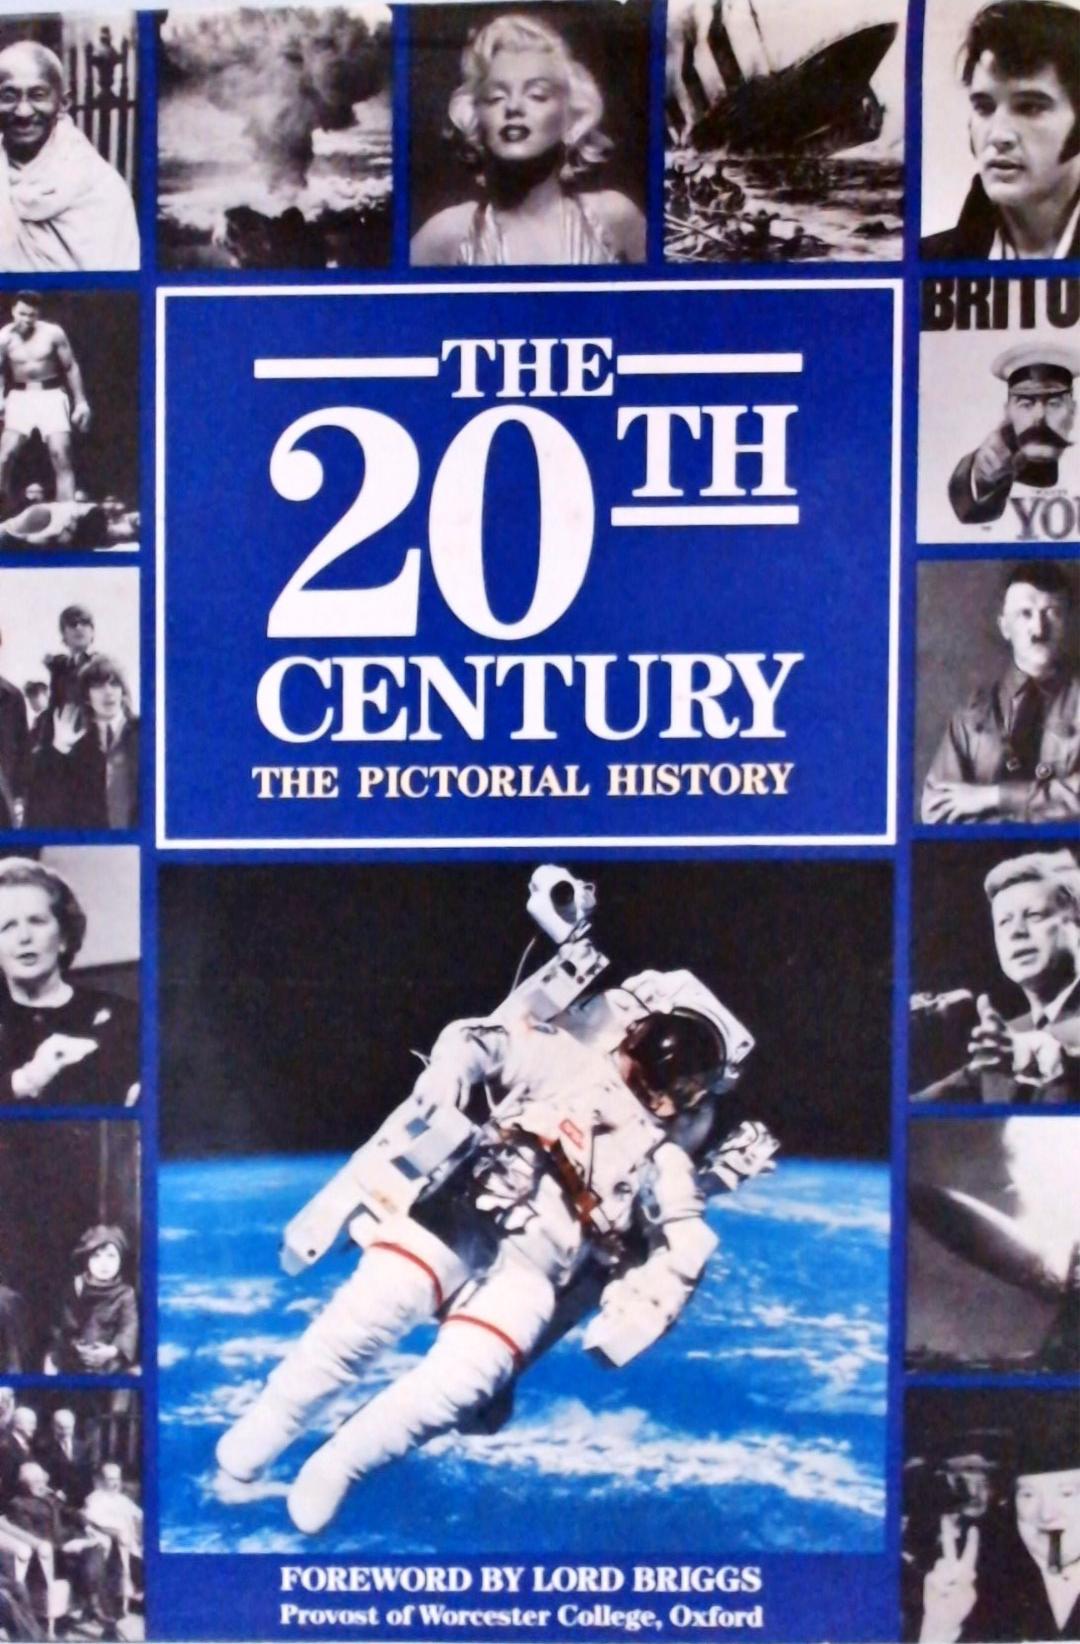 The 20th Century - The Pictorial History